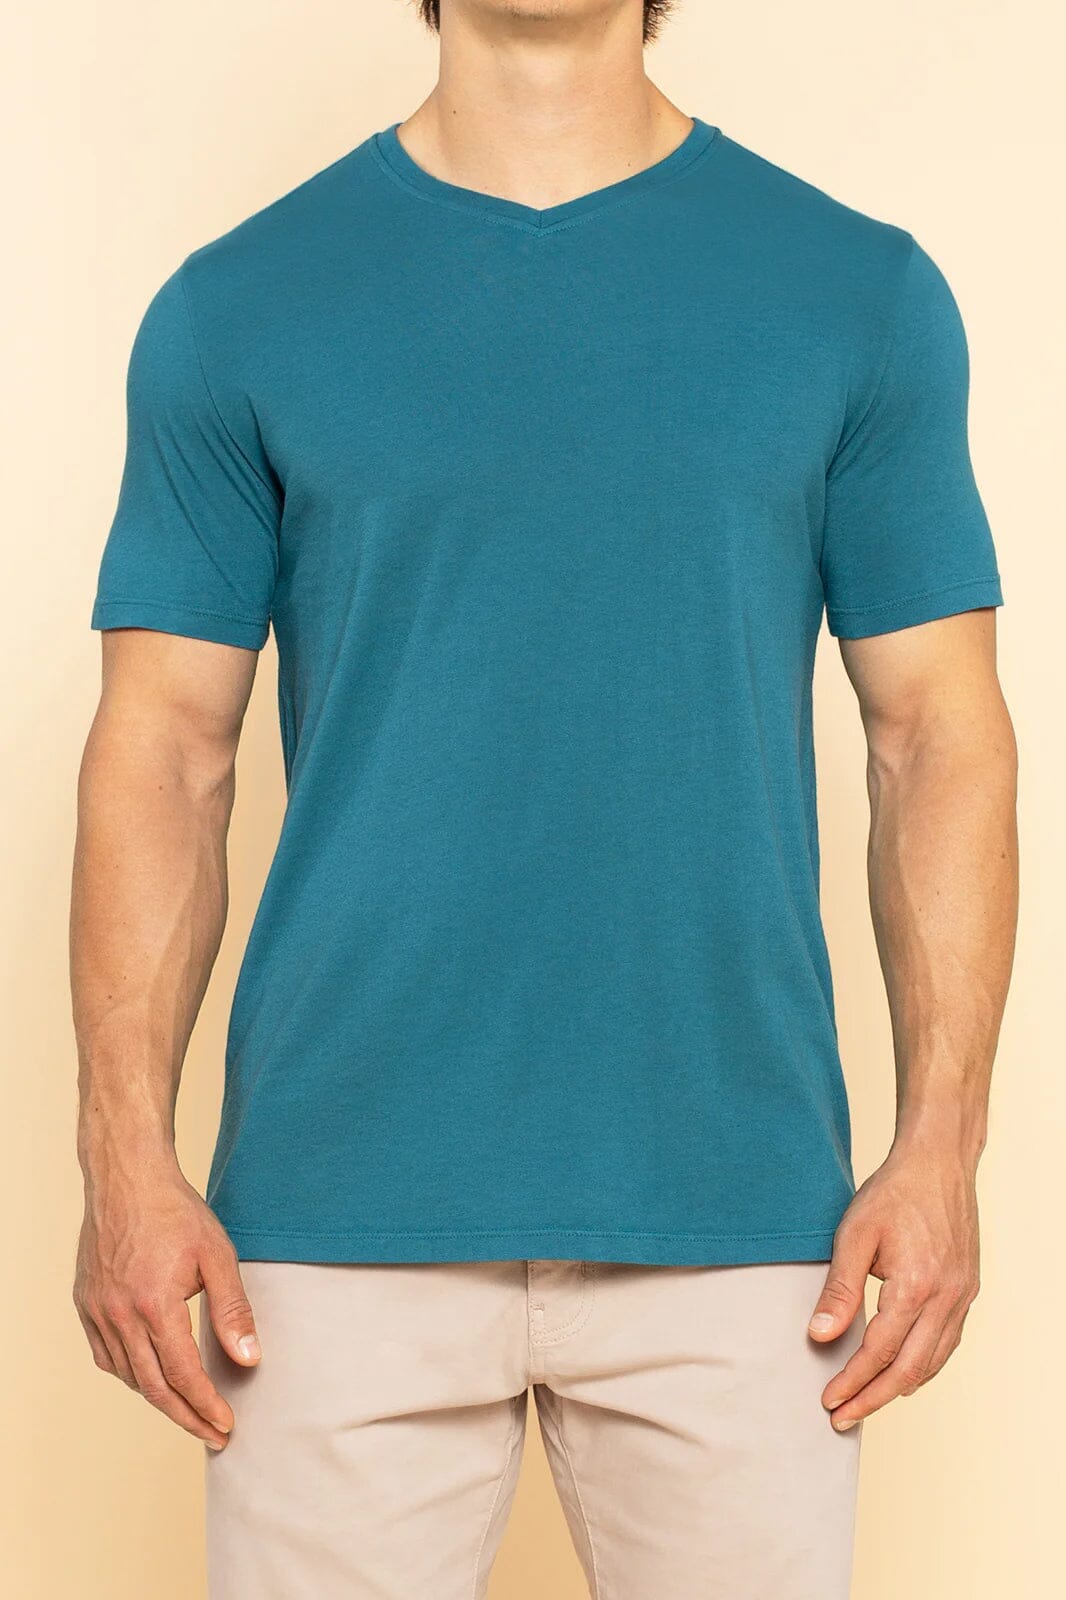 Teal V-neck Tee For Men By Shore